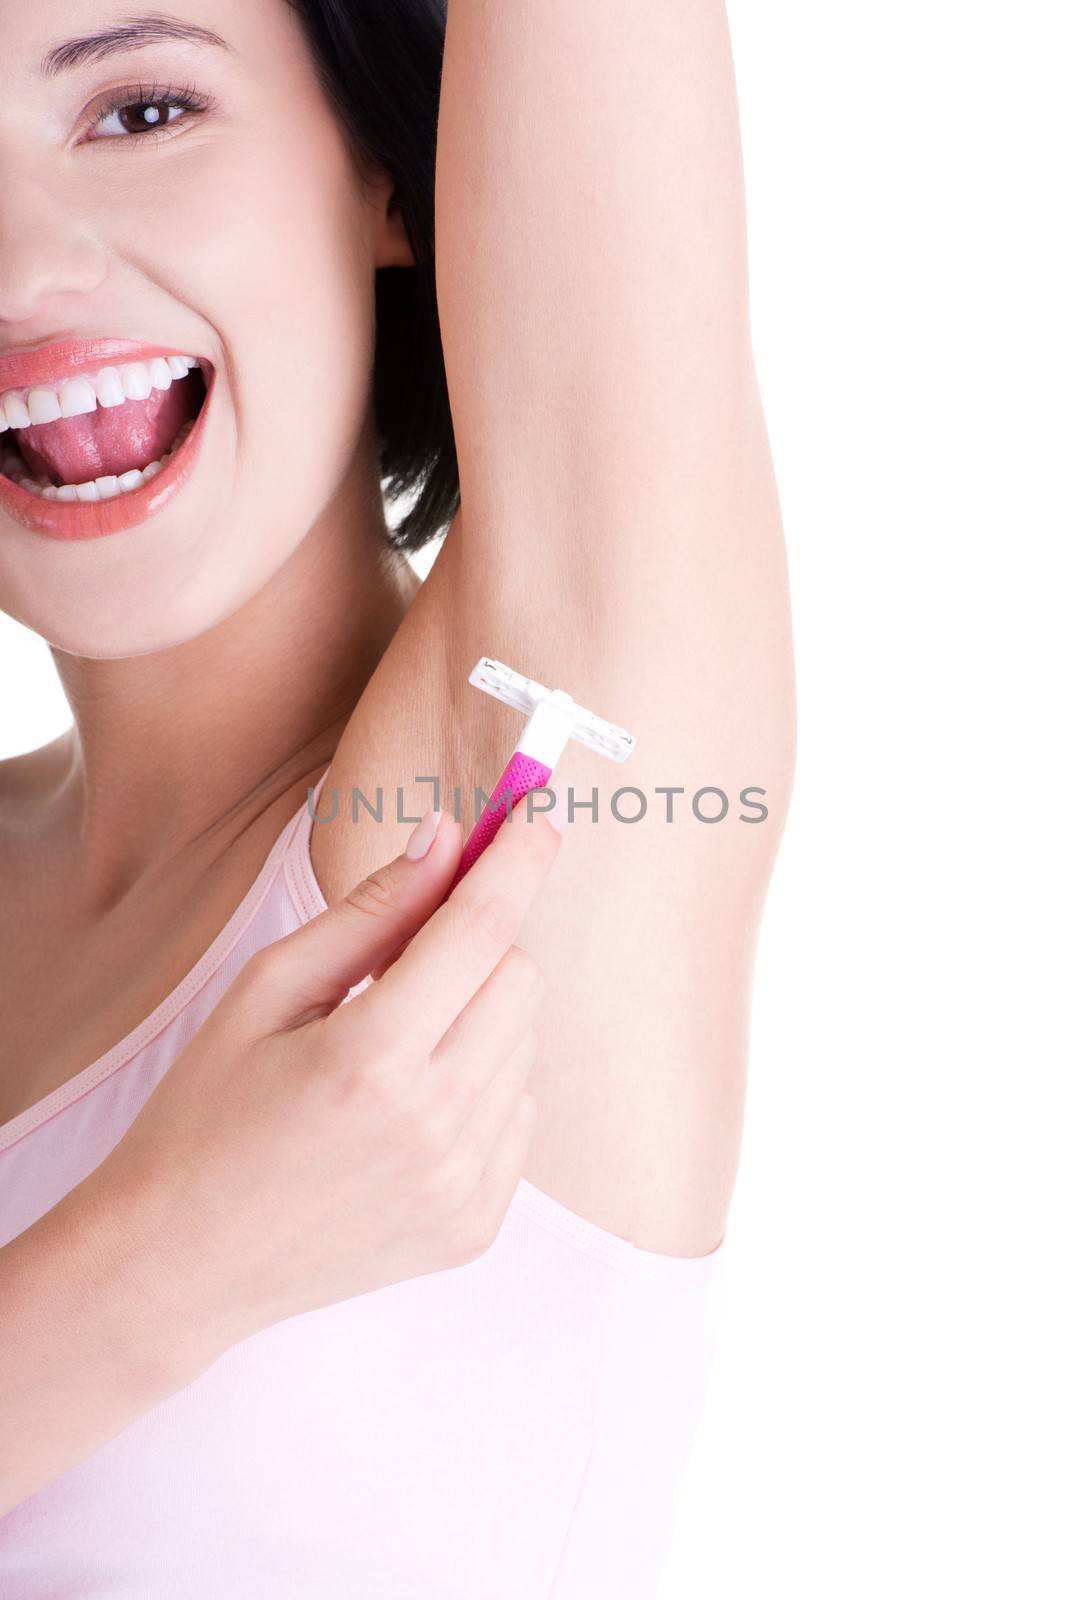 Smiling young woman shaving her armpit by BDS